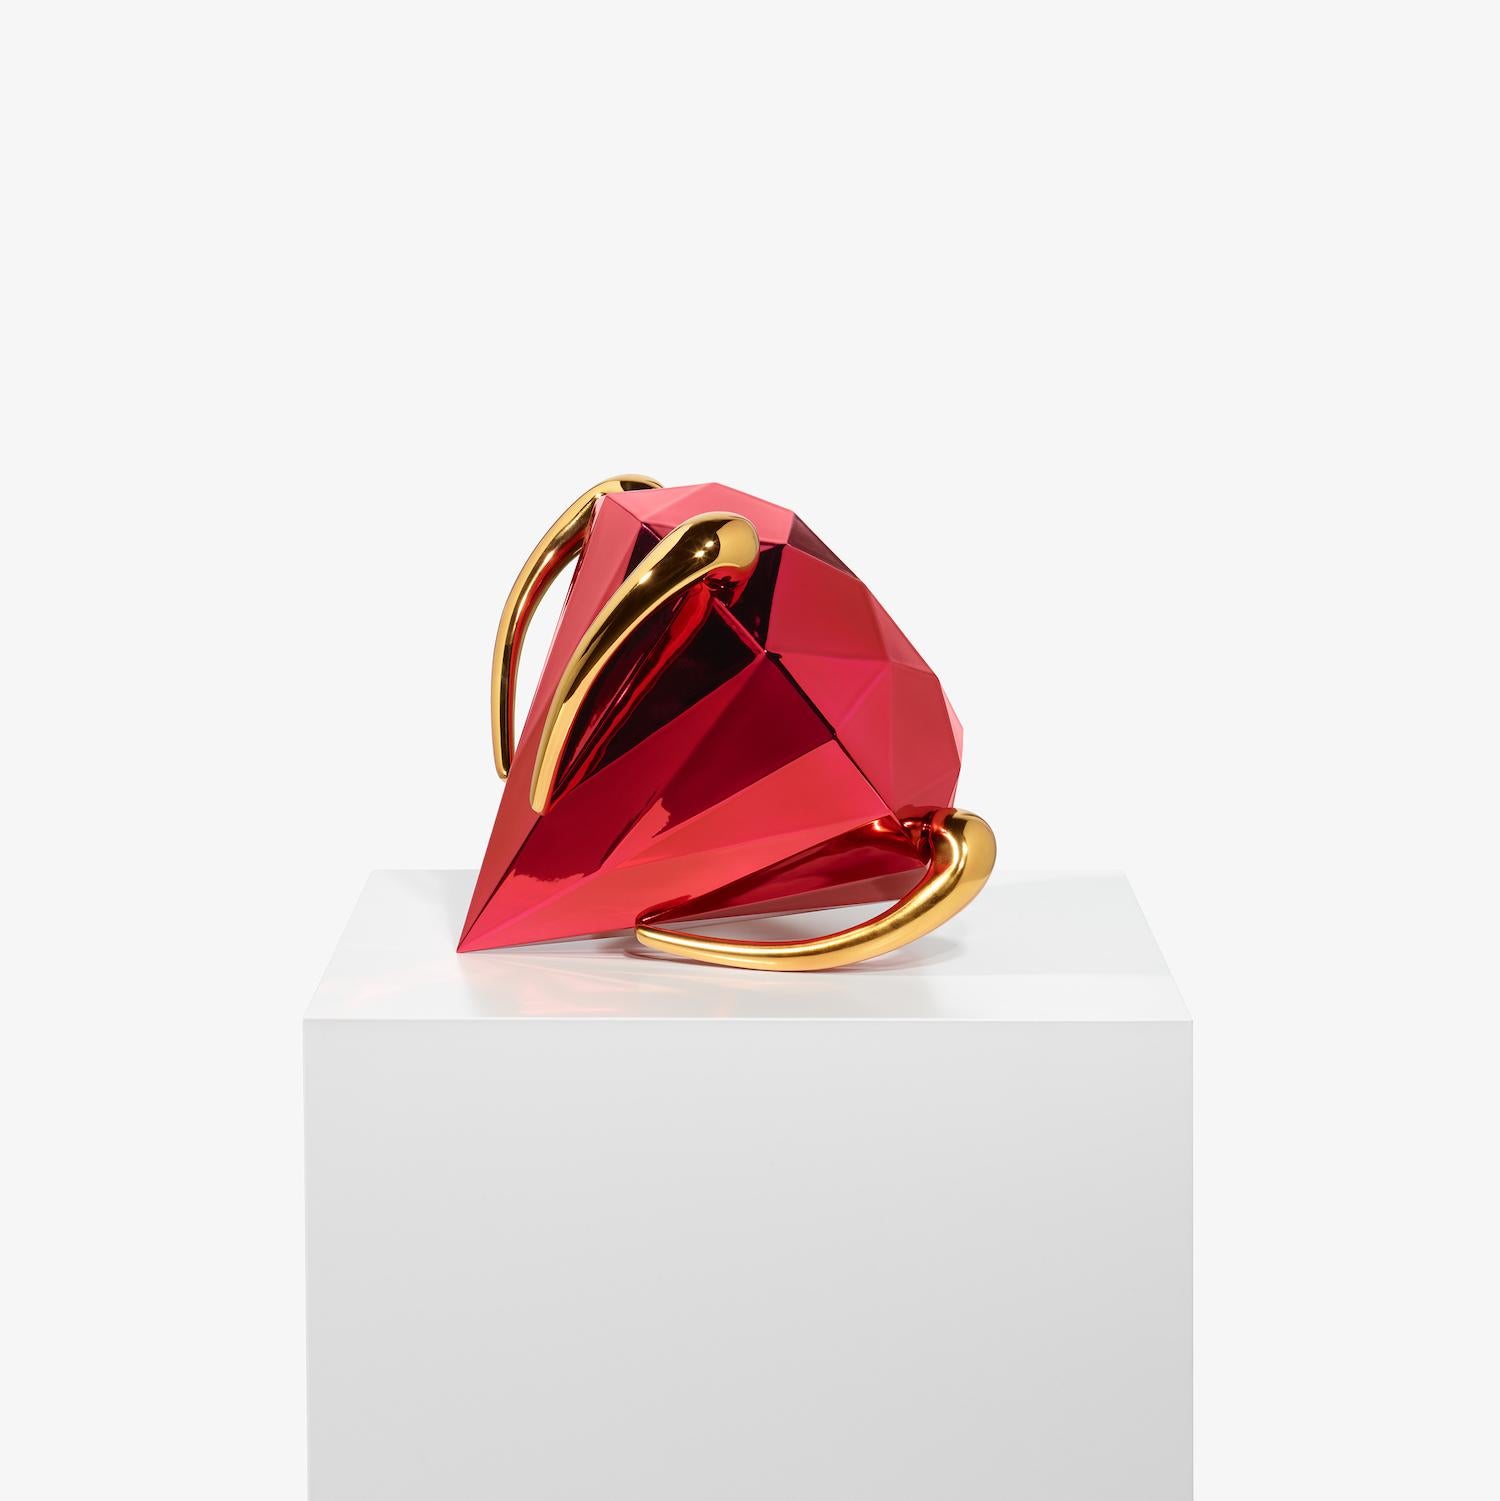 Red Diamond Sculpture by Jeff Koons, Porcelain, Luxury Objects, Contemporary Art For Sale 1